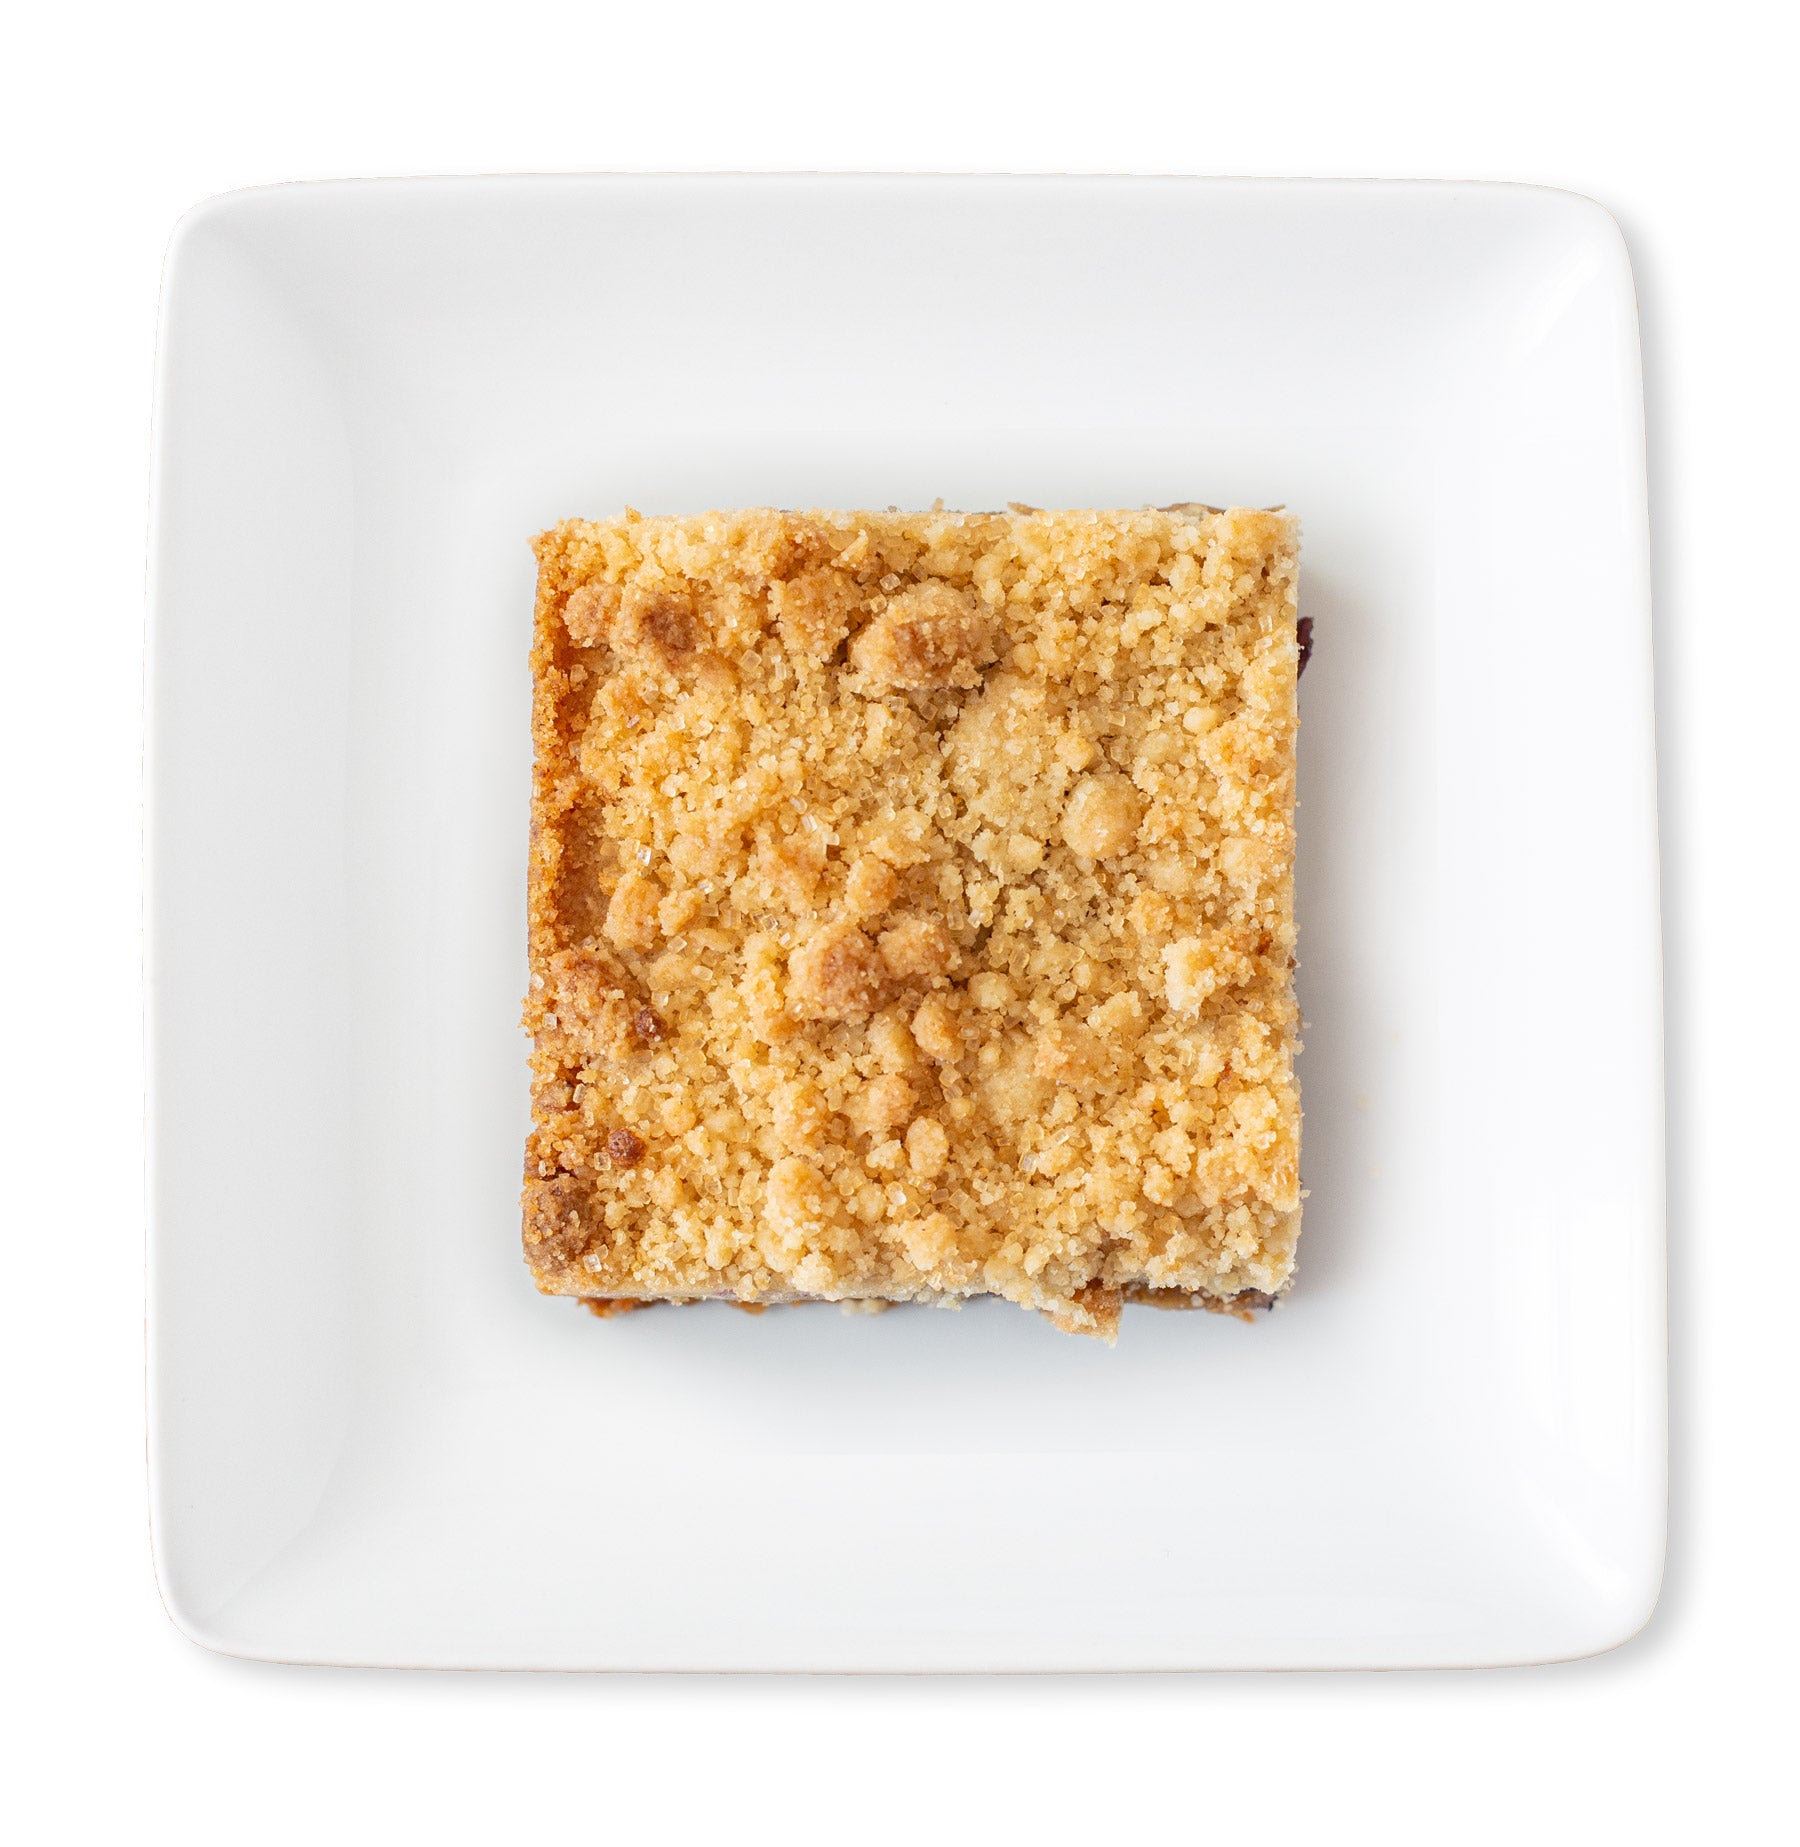 A close-up image of a Blueberry Crumb Blondie bar, showcasing its golden-brown crumb topping.